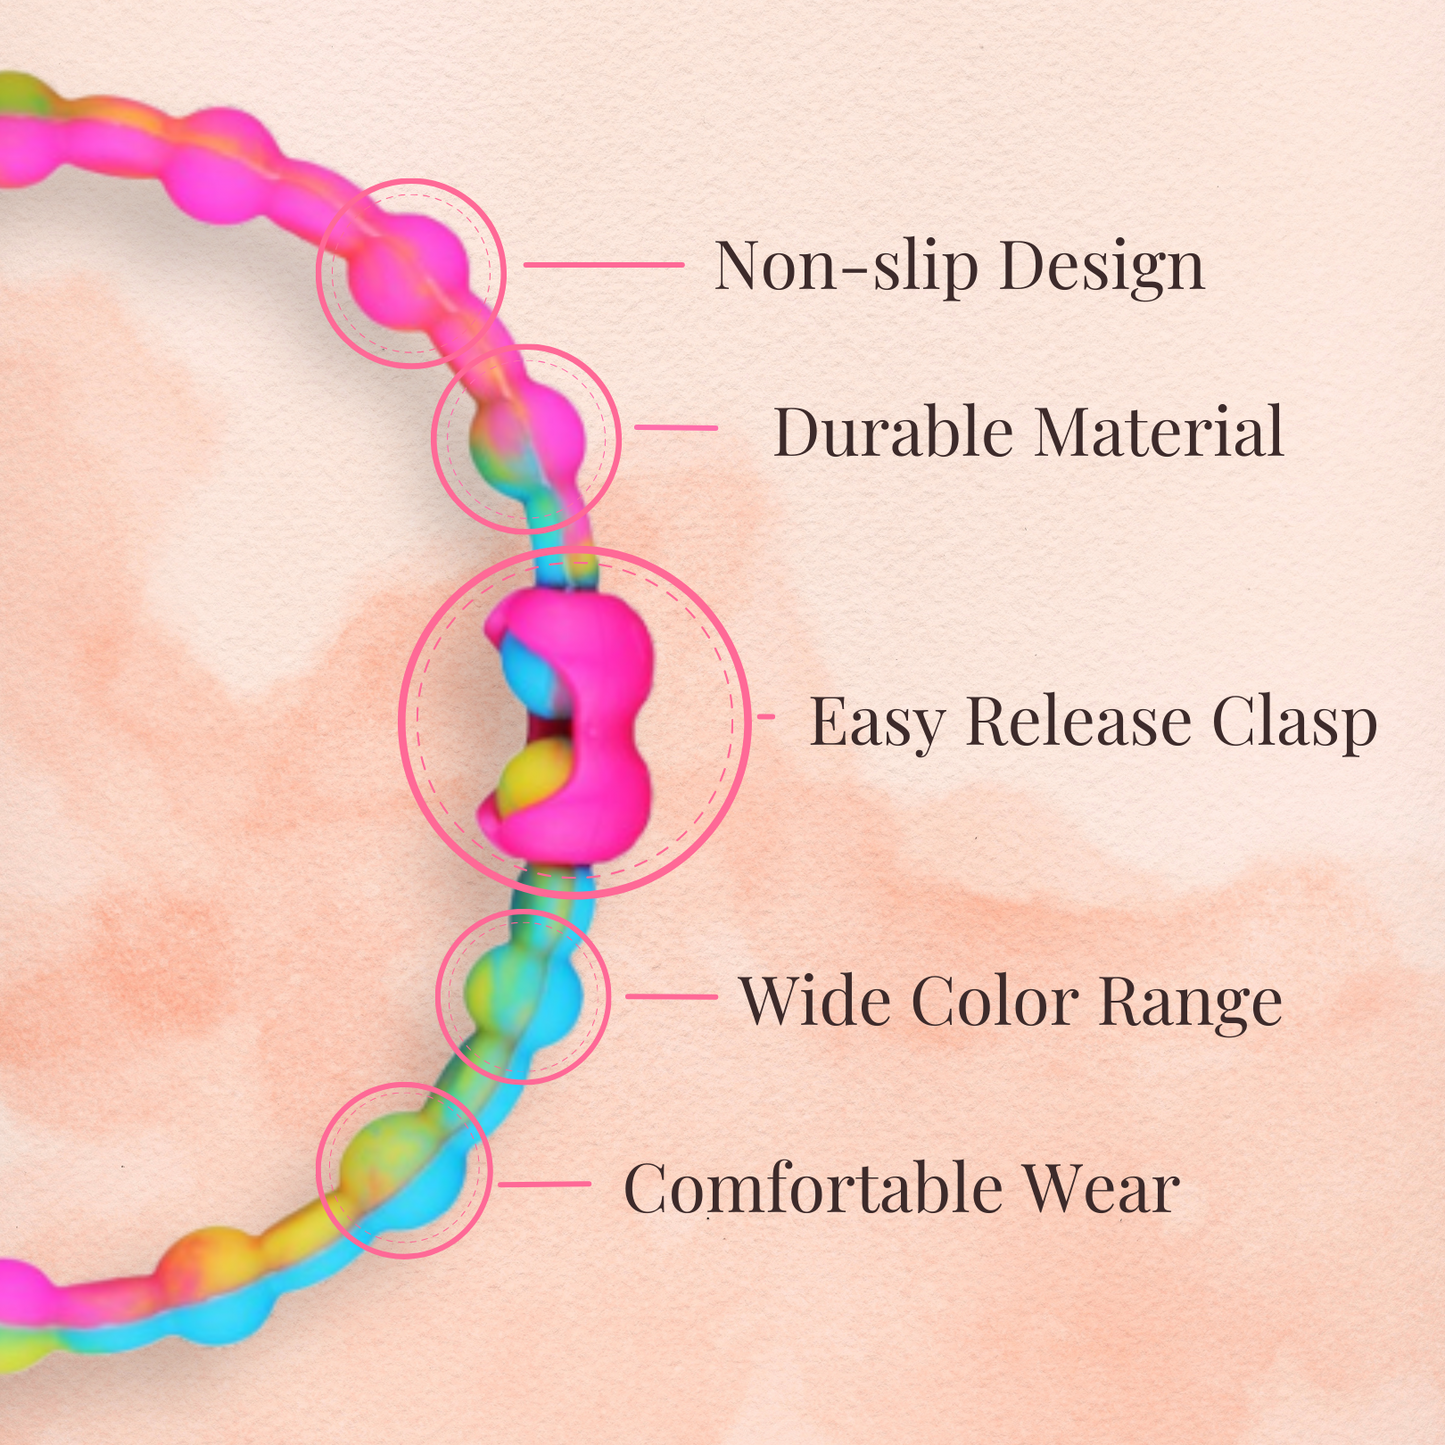 Marble Rose Gold PRO Hair Ties (4-Pack): Elegant Style for Every Look